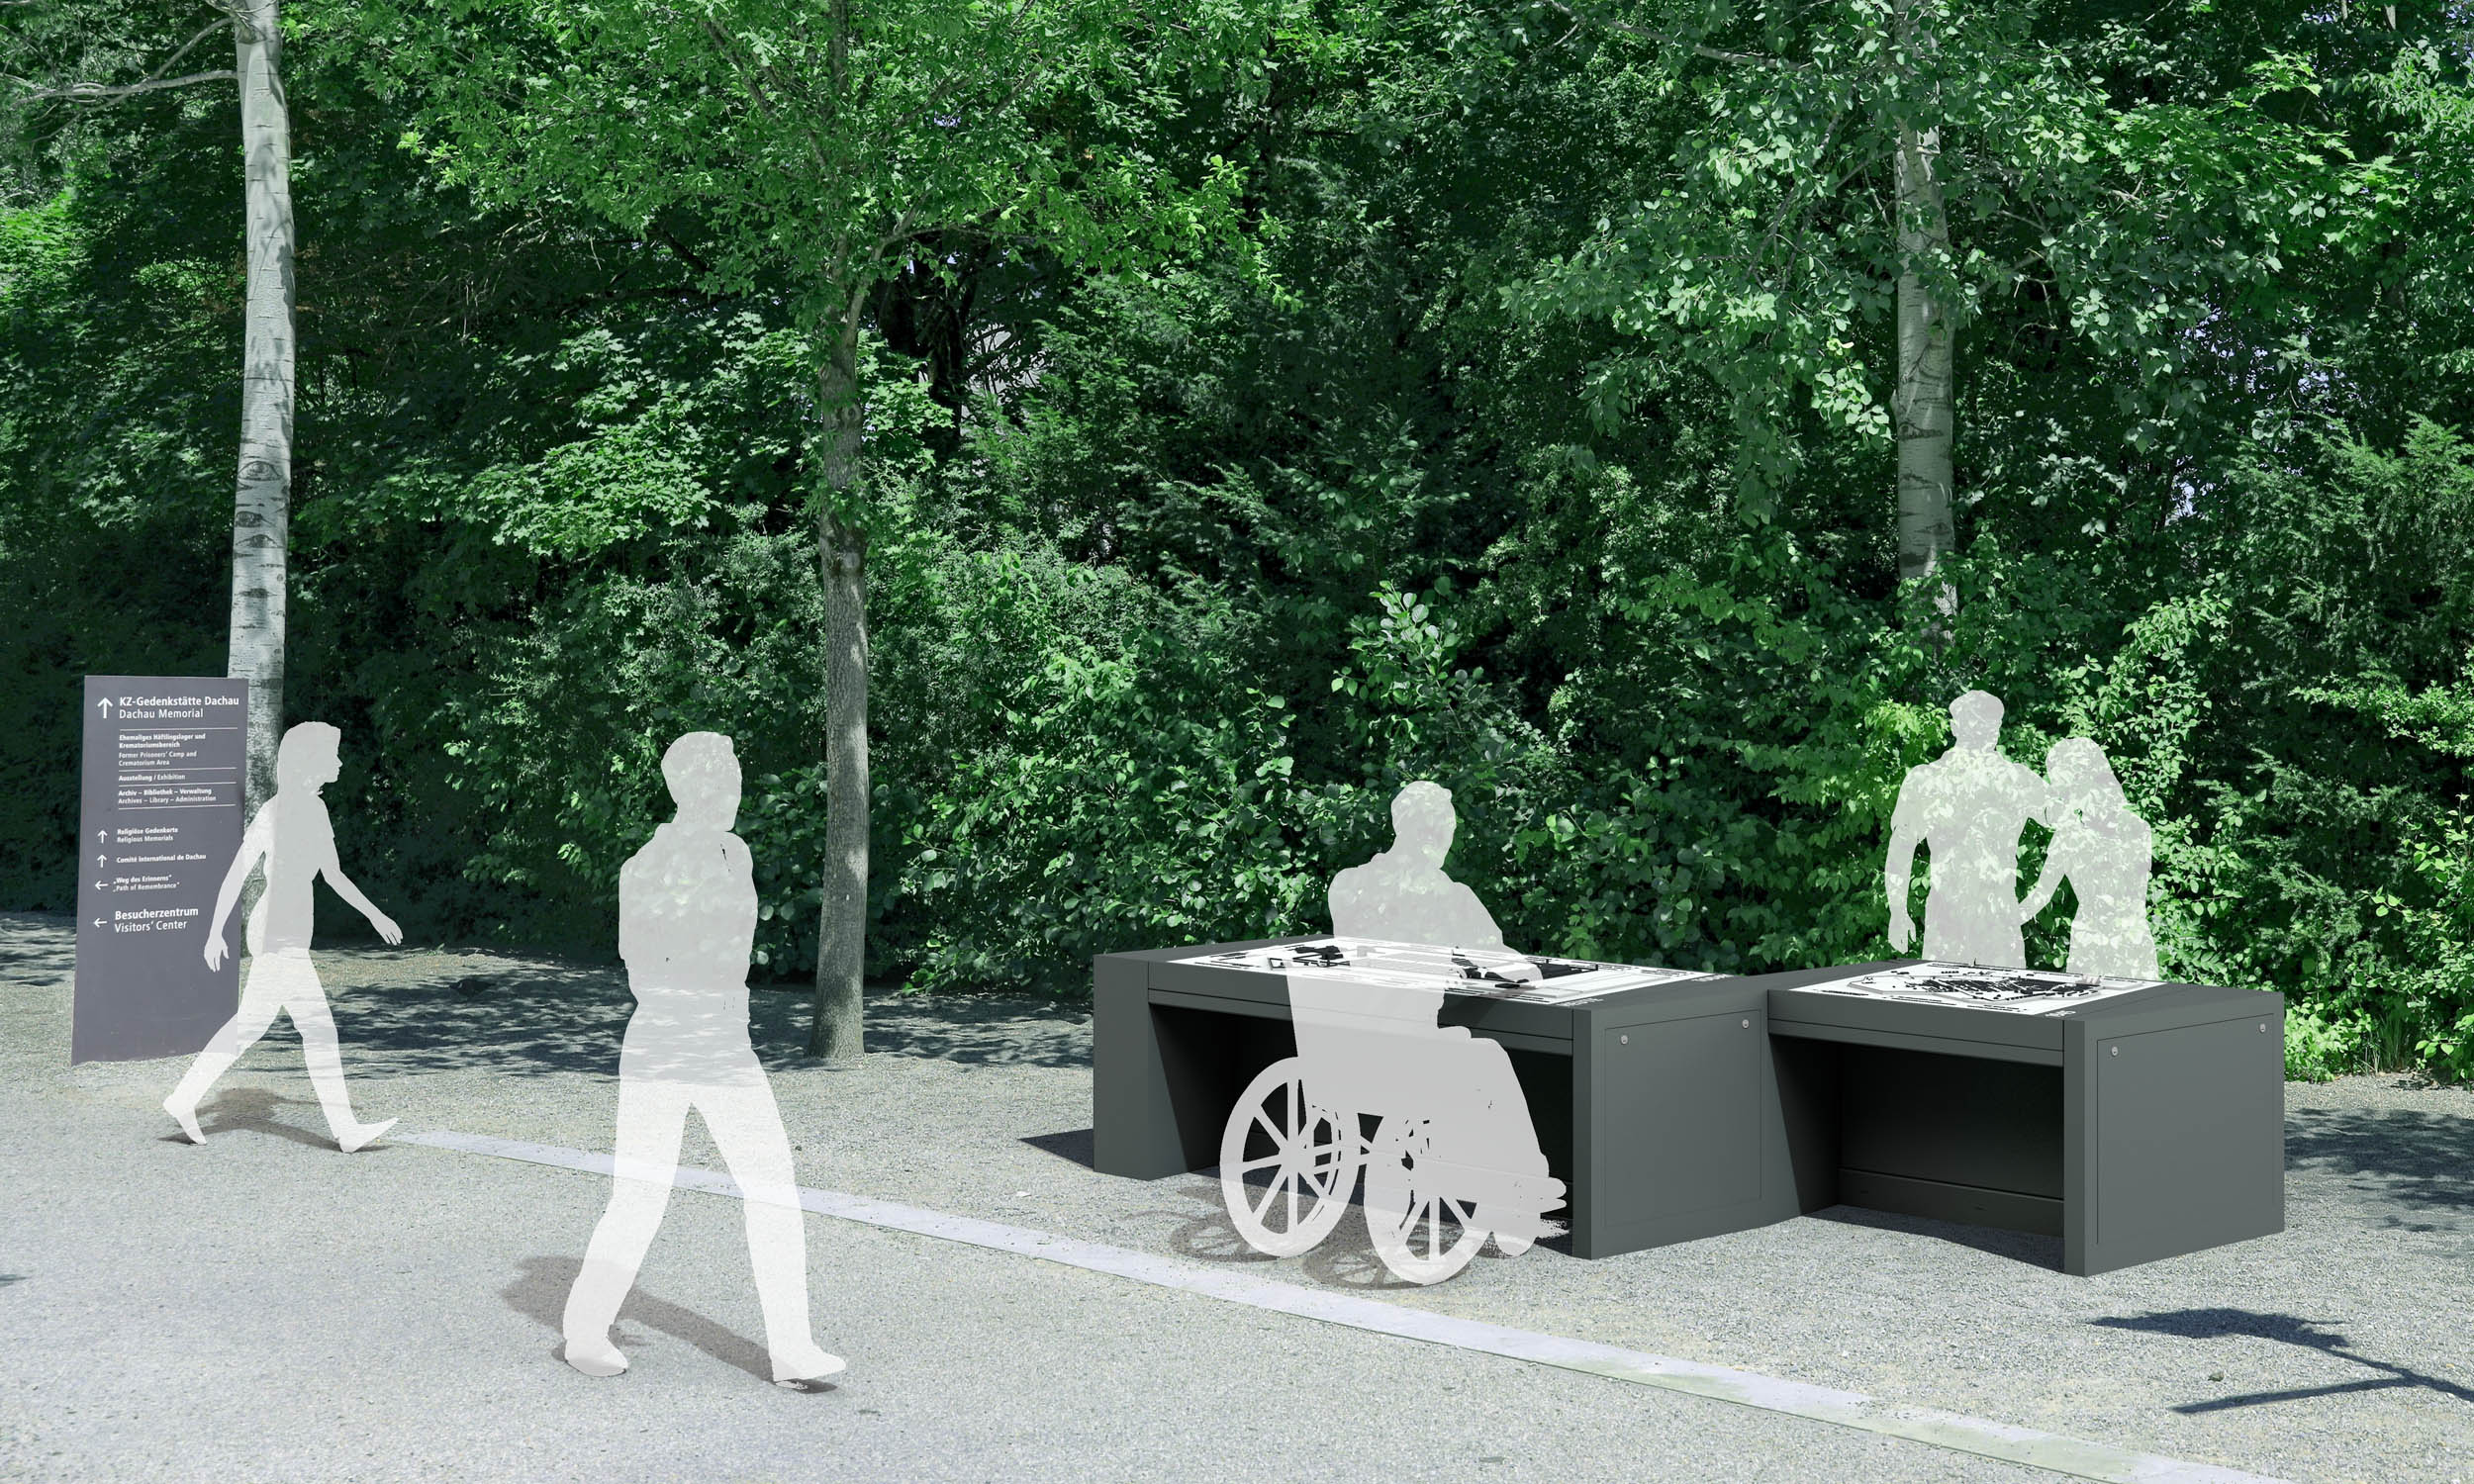 A rendering of the tactile model in the outdoor space